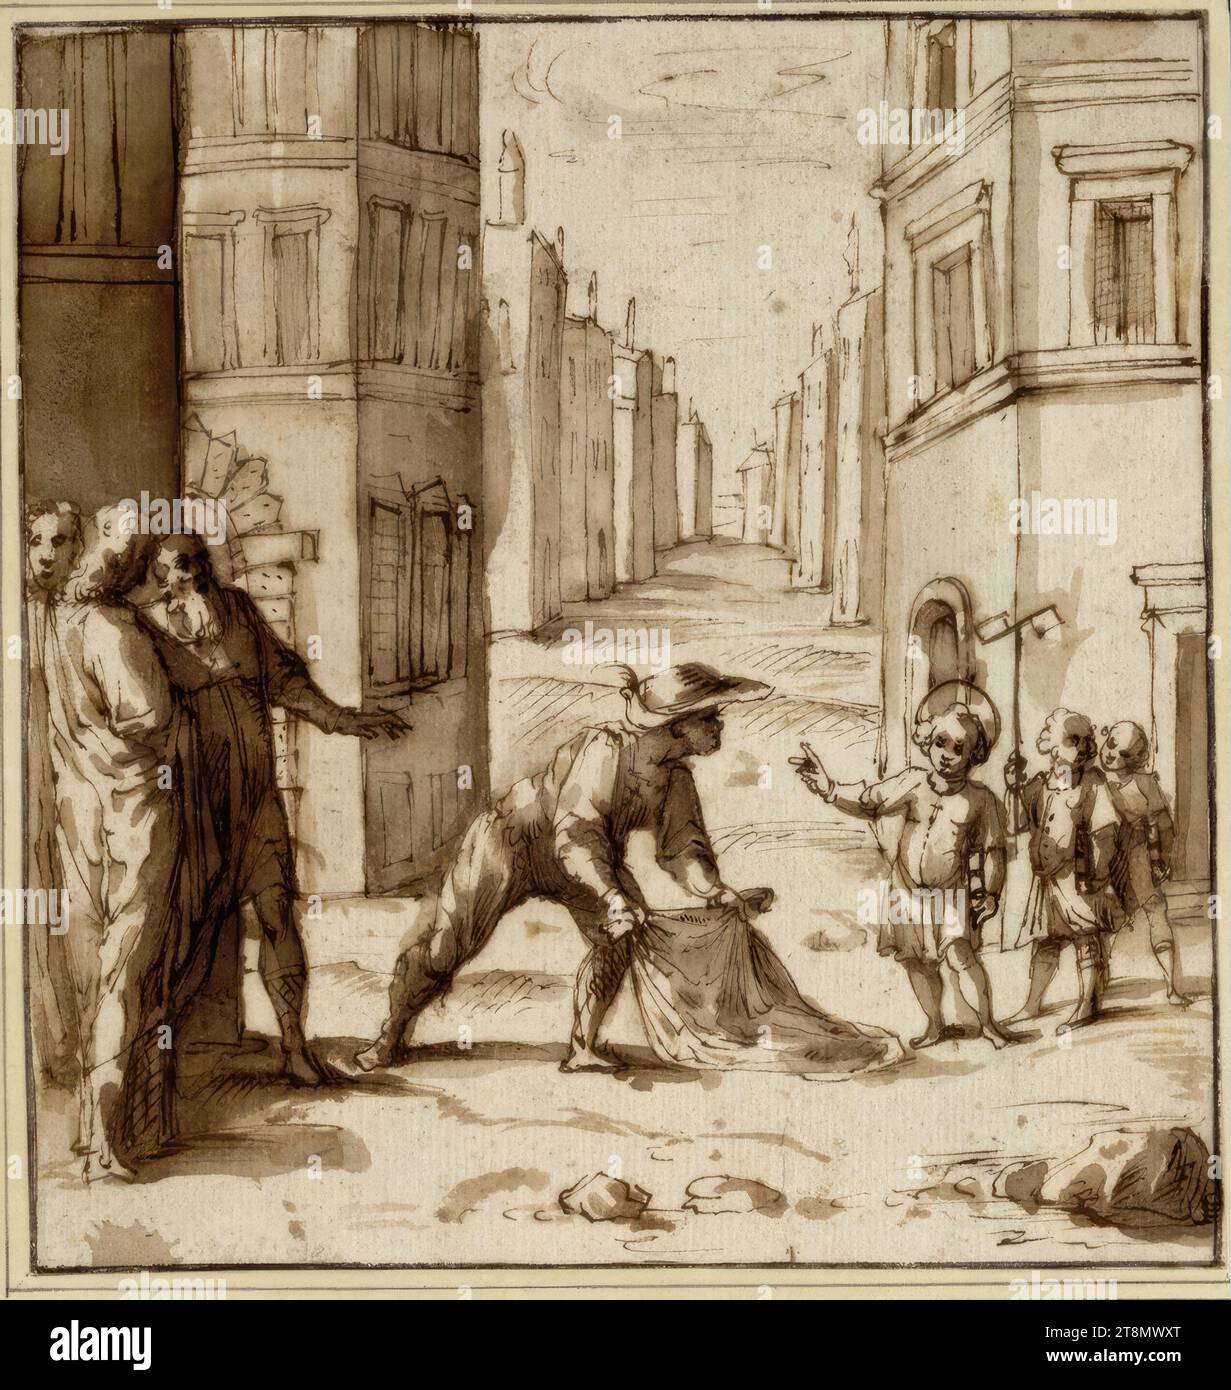 A simple man spreads his cloak on the street in front of Saint Francis as a child, Domenico Cresti called Passignano (Badia a Passignano (Tavarnelle Val di Pesa) 1559 - 1638 Florence), drawing, pen, ink, wash, 16.5 x 16.0 cm, l.l. Duke Albert of Saxe-Teschen Stock Photo